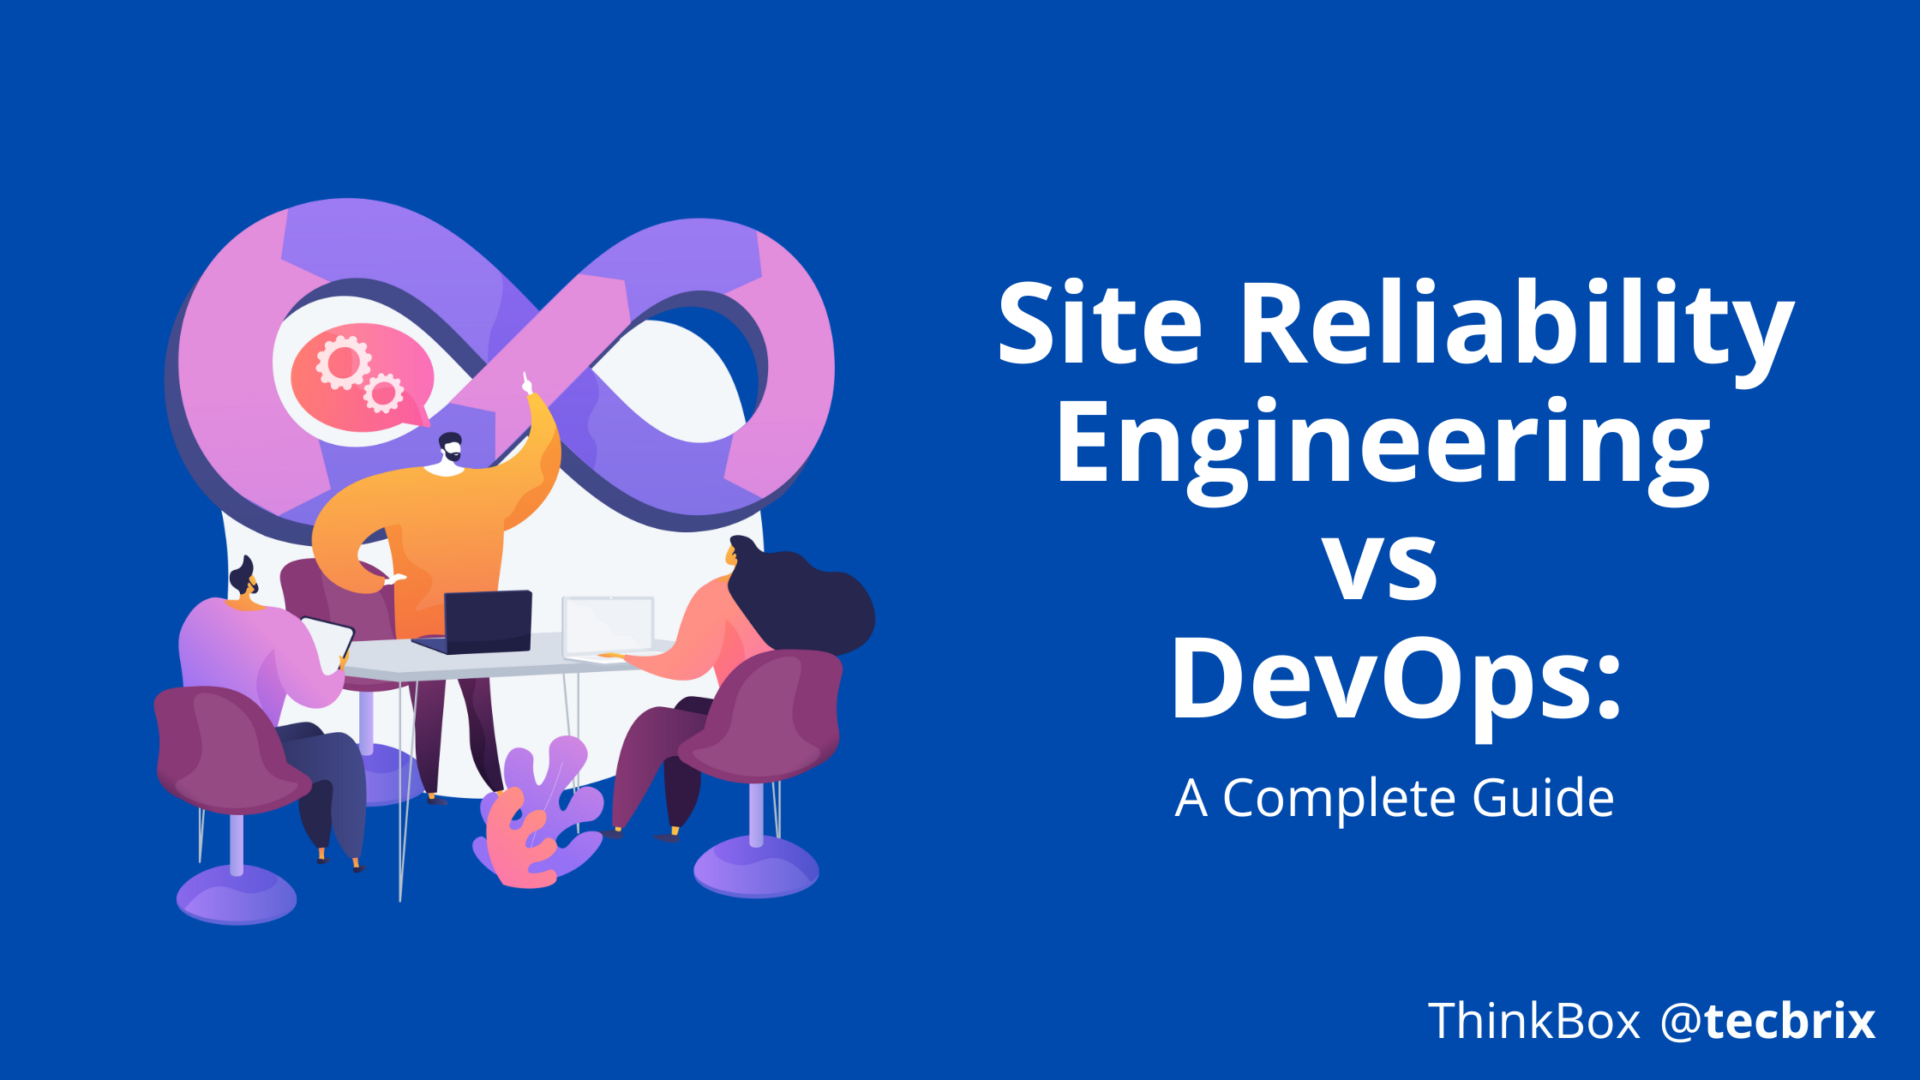 Site Reliability Engineering vs DevOps Complete Guide